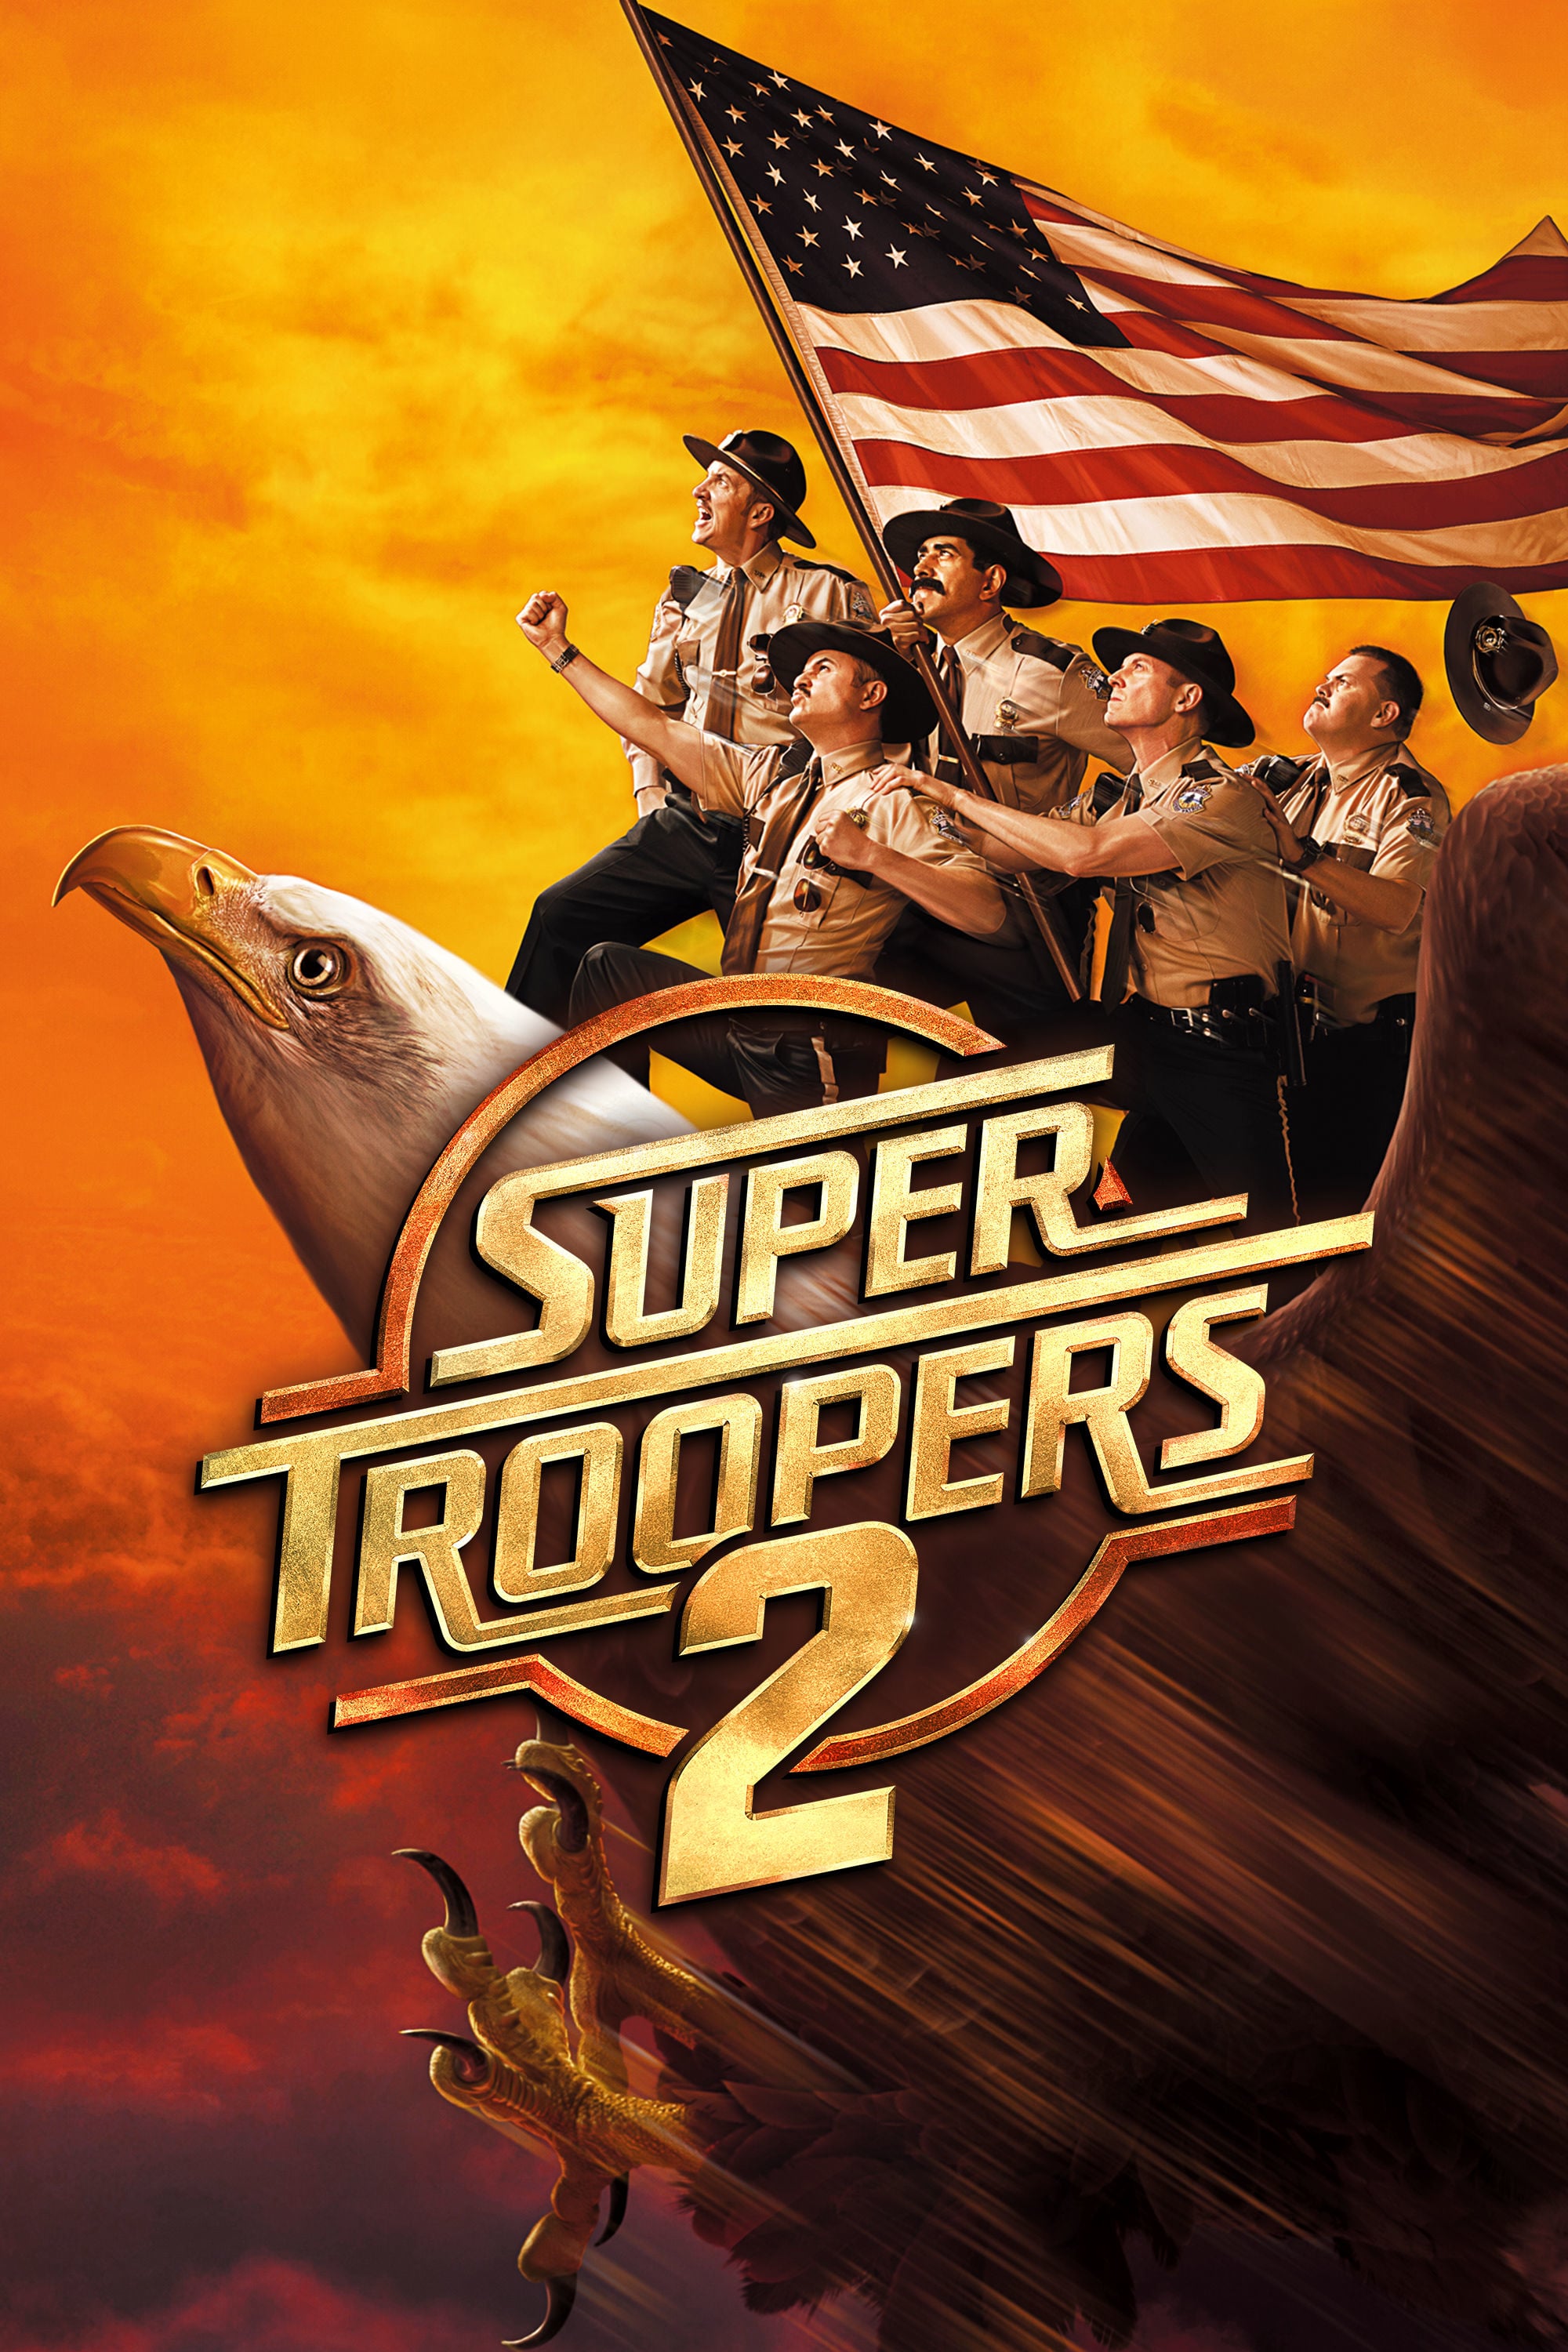 Poster for the movie "Super Troopers 2"